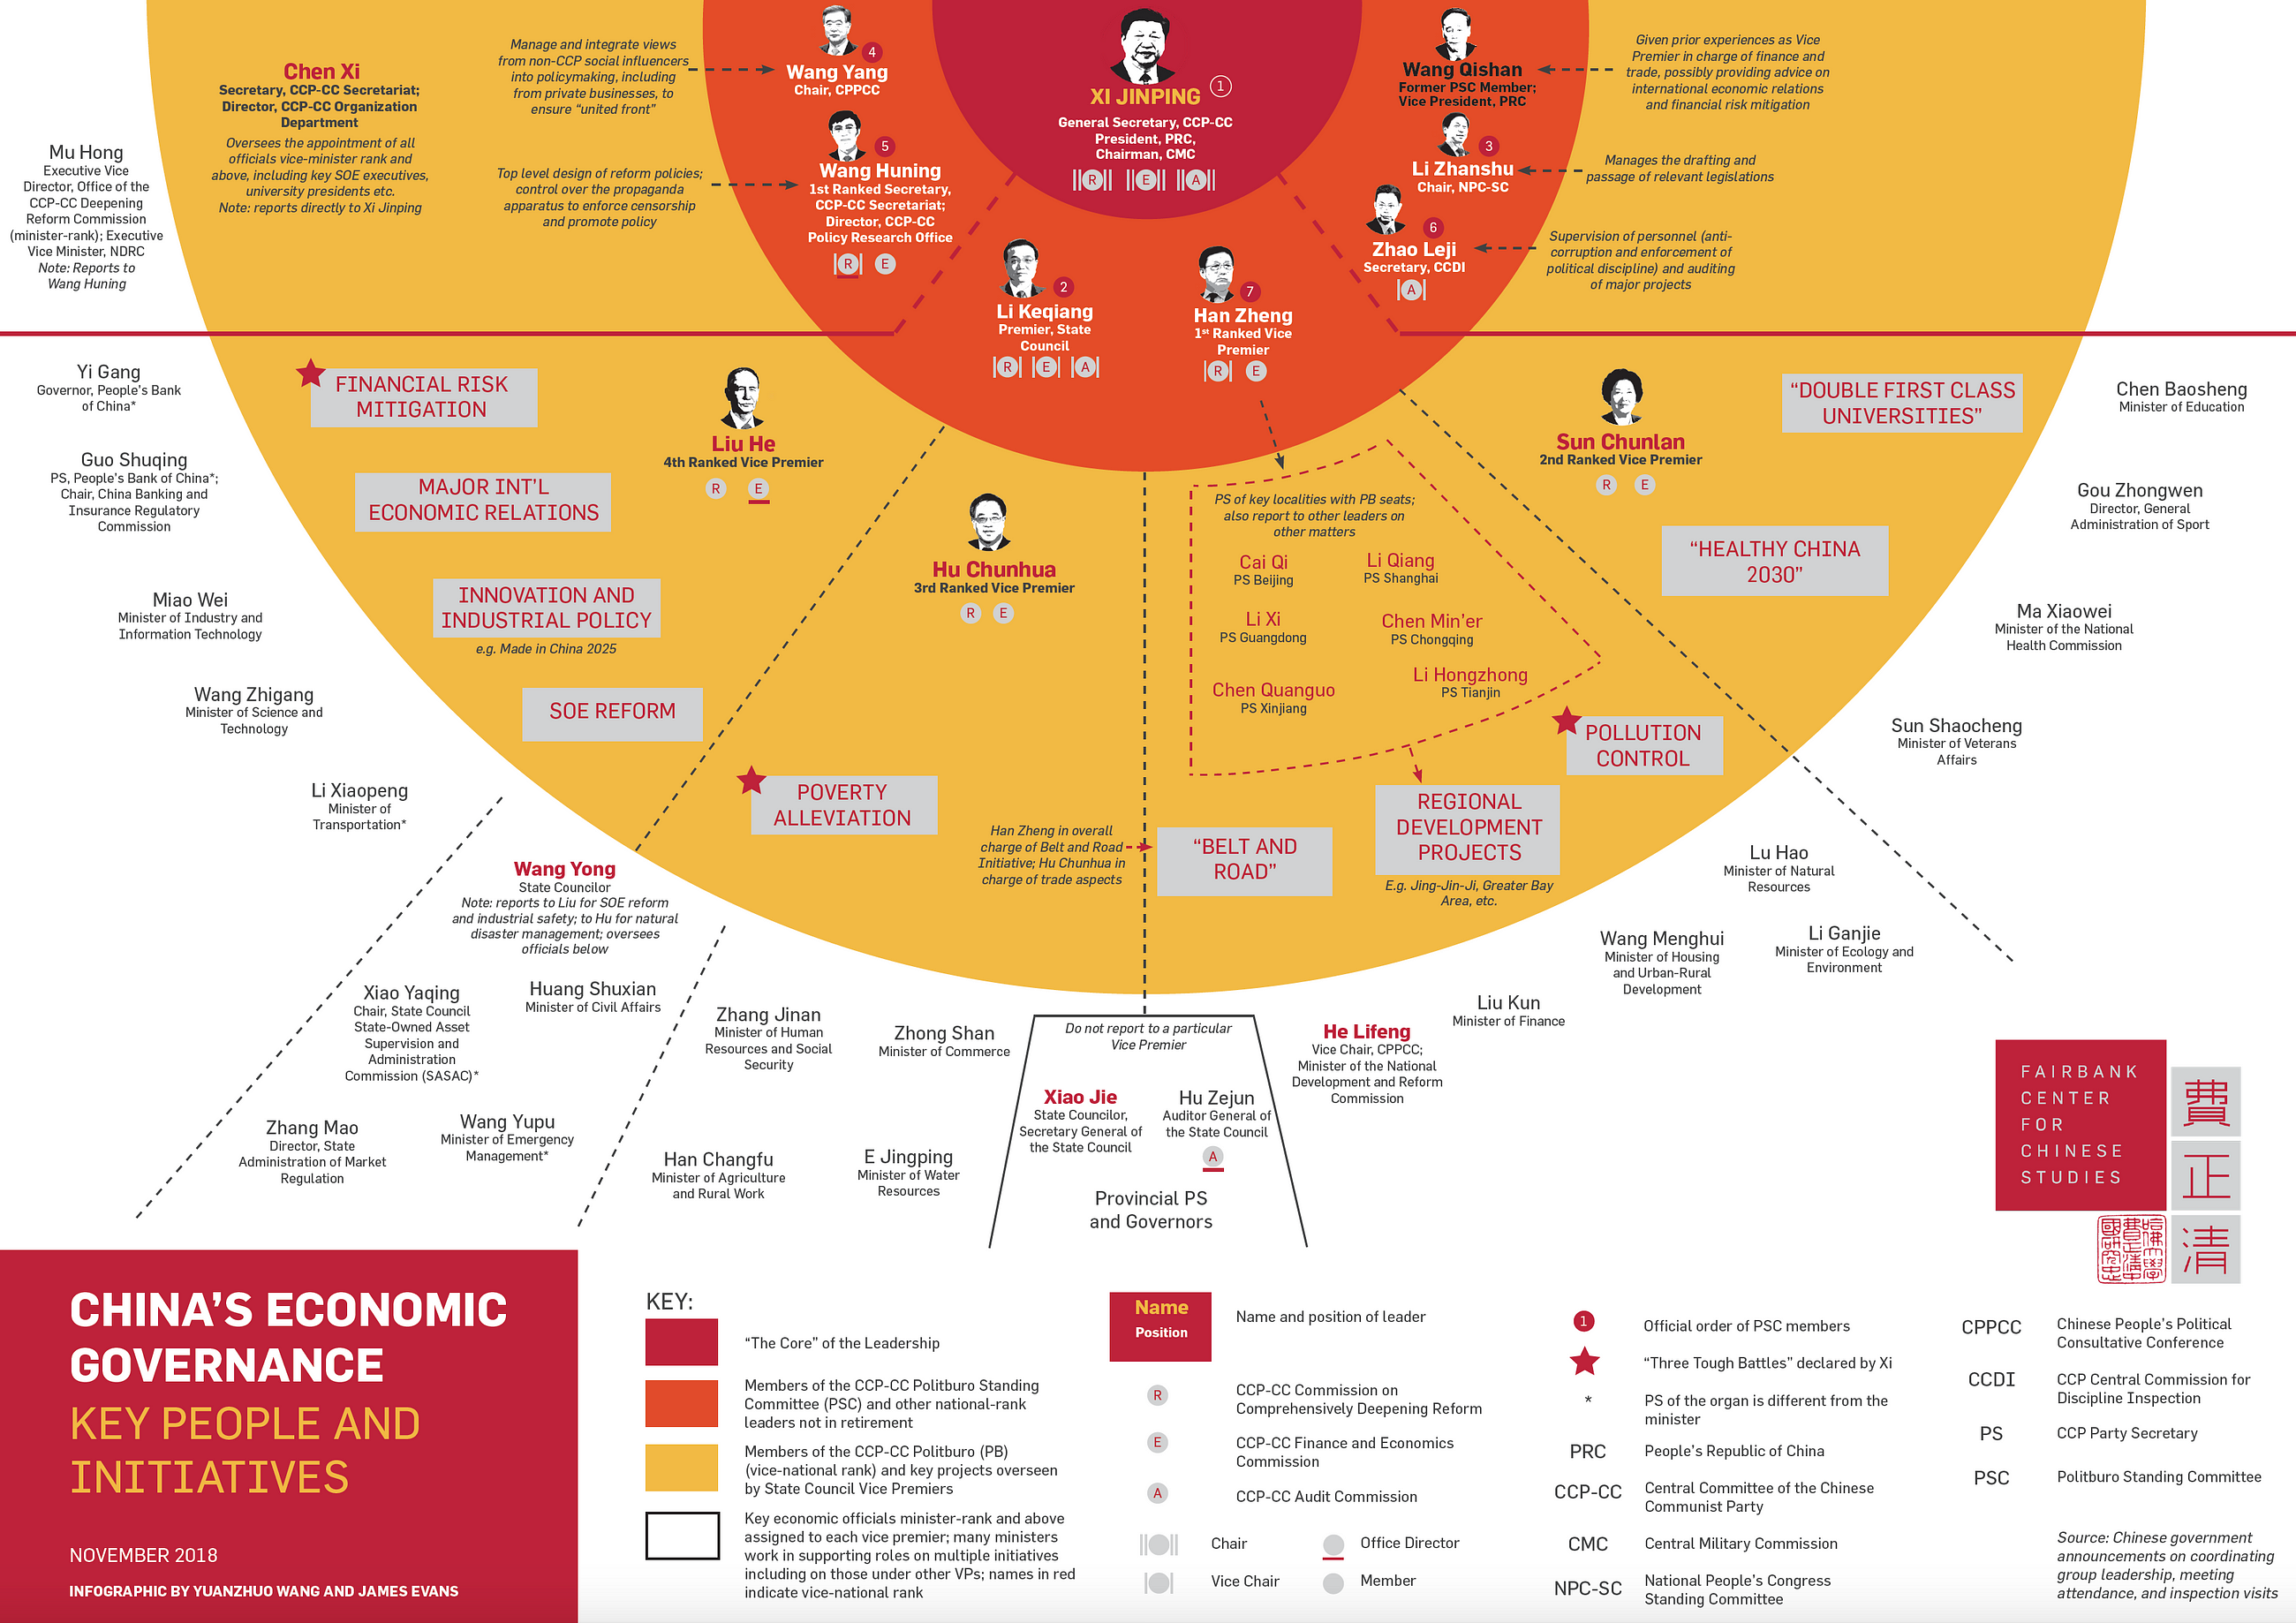 INFOGRAPHIC China’s Economic Governance Fairbank Center for Chinese